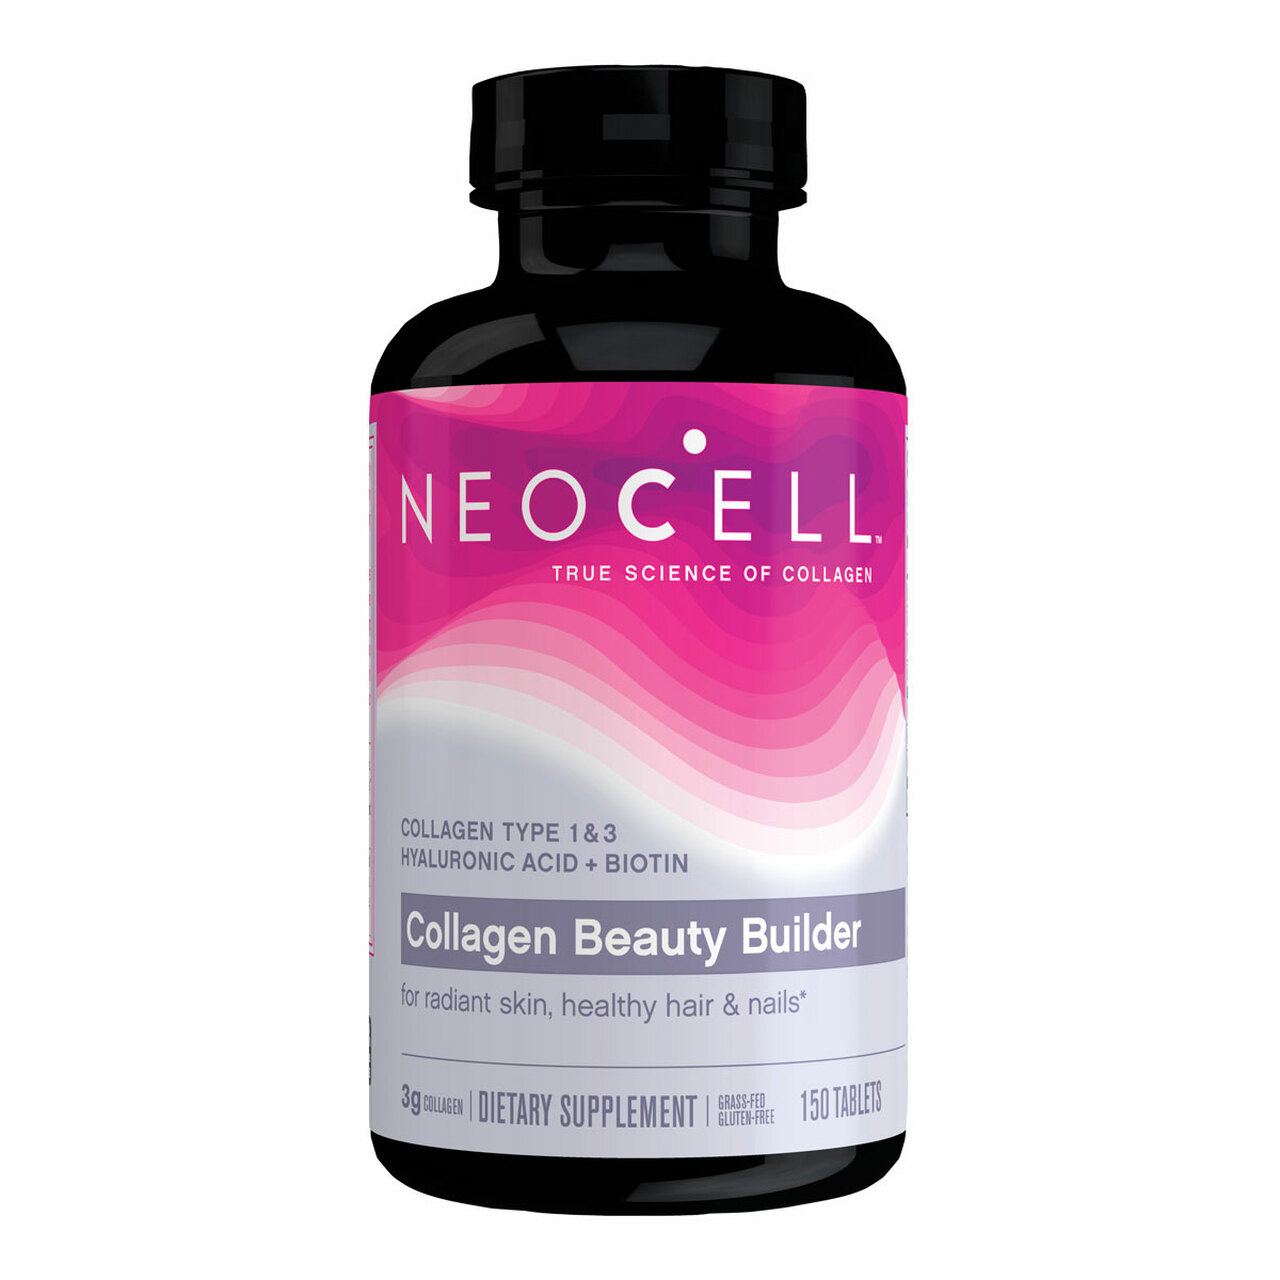 Neocell 活性胶原蛋白含玻尿酸硫辛酸VC生物素 150片 NeoCell Collagen Beauty Builder, for Radiant Skin, Healthy Hair & Nails, 150 Tablets